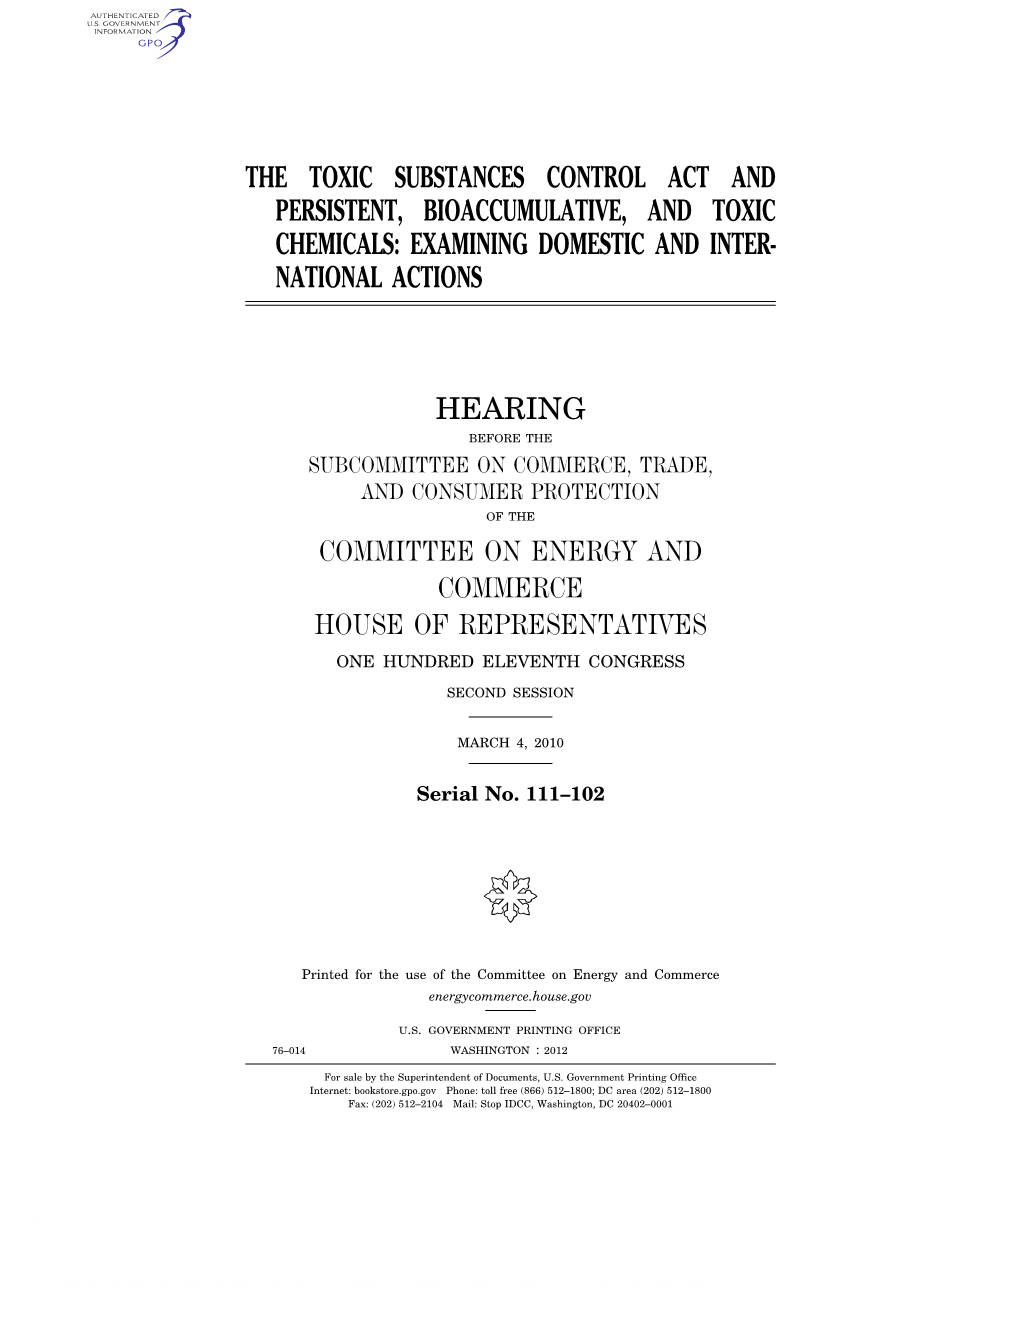 The Toxic Substances Control Act and Persistent, Bioaccumulative, and Toxic Chemicals: Examining Domestic and Inter- National Actions